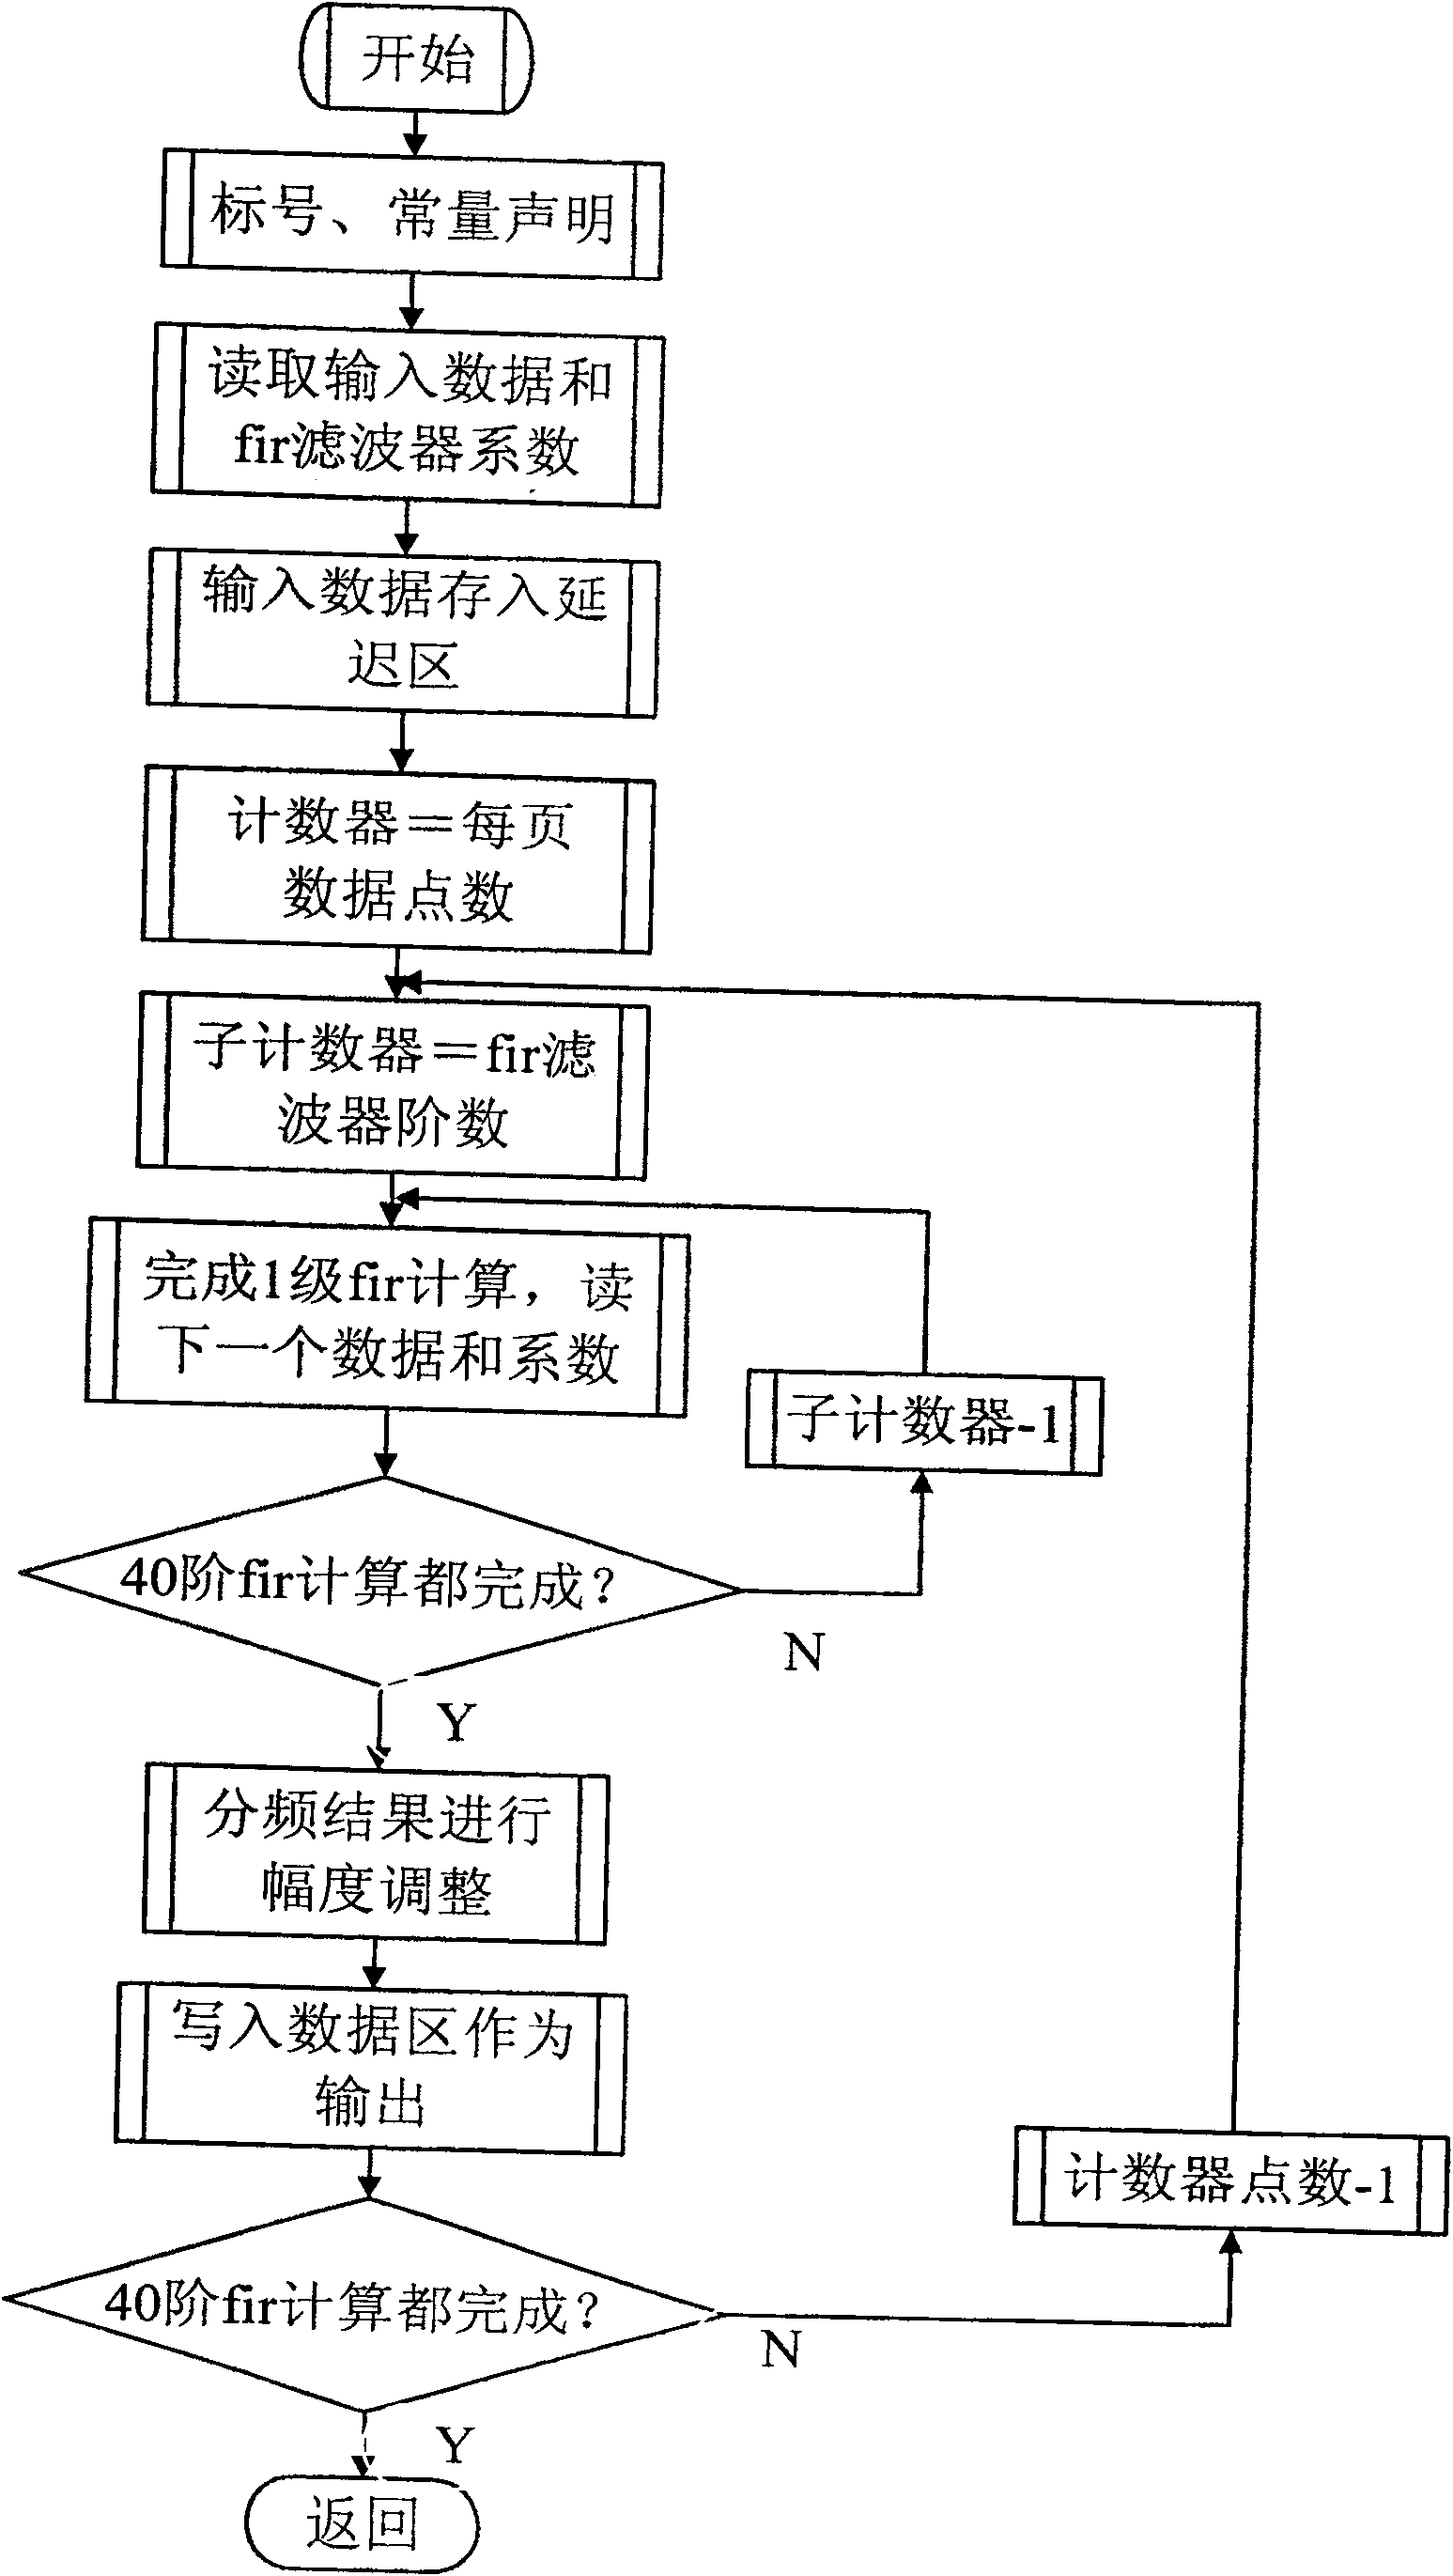 Electronic cochlea language processing method having S parameter control and based-on Chinese language characteristics